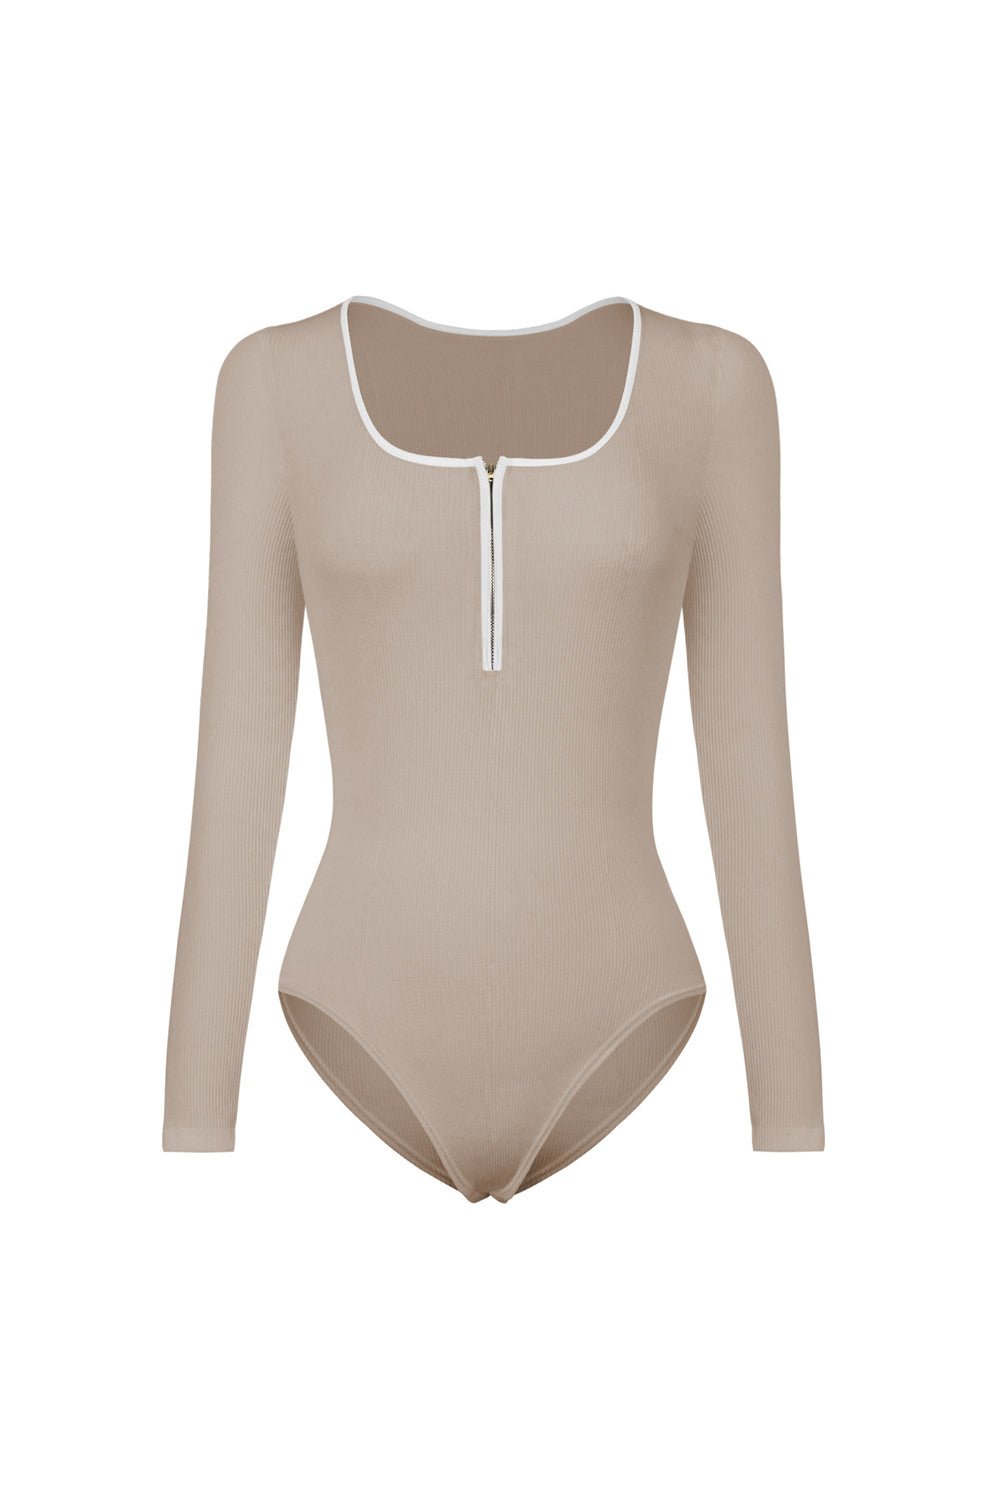 Enchantress' Ribbed Bodysuit - Embrace the Ethereal Beauty and Captivate Hearts with Confidence - Guy Christopher